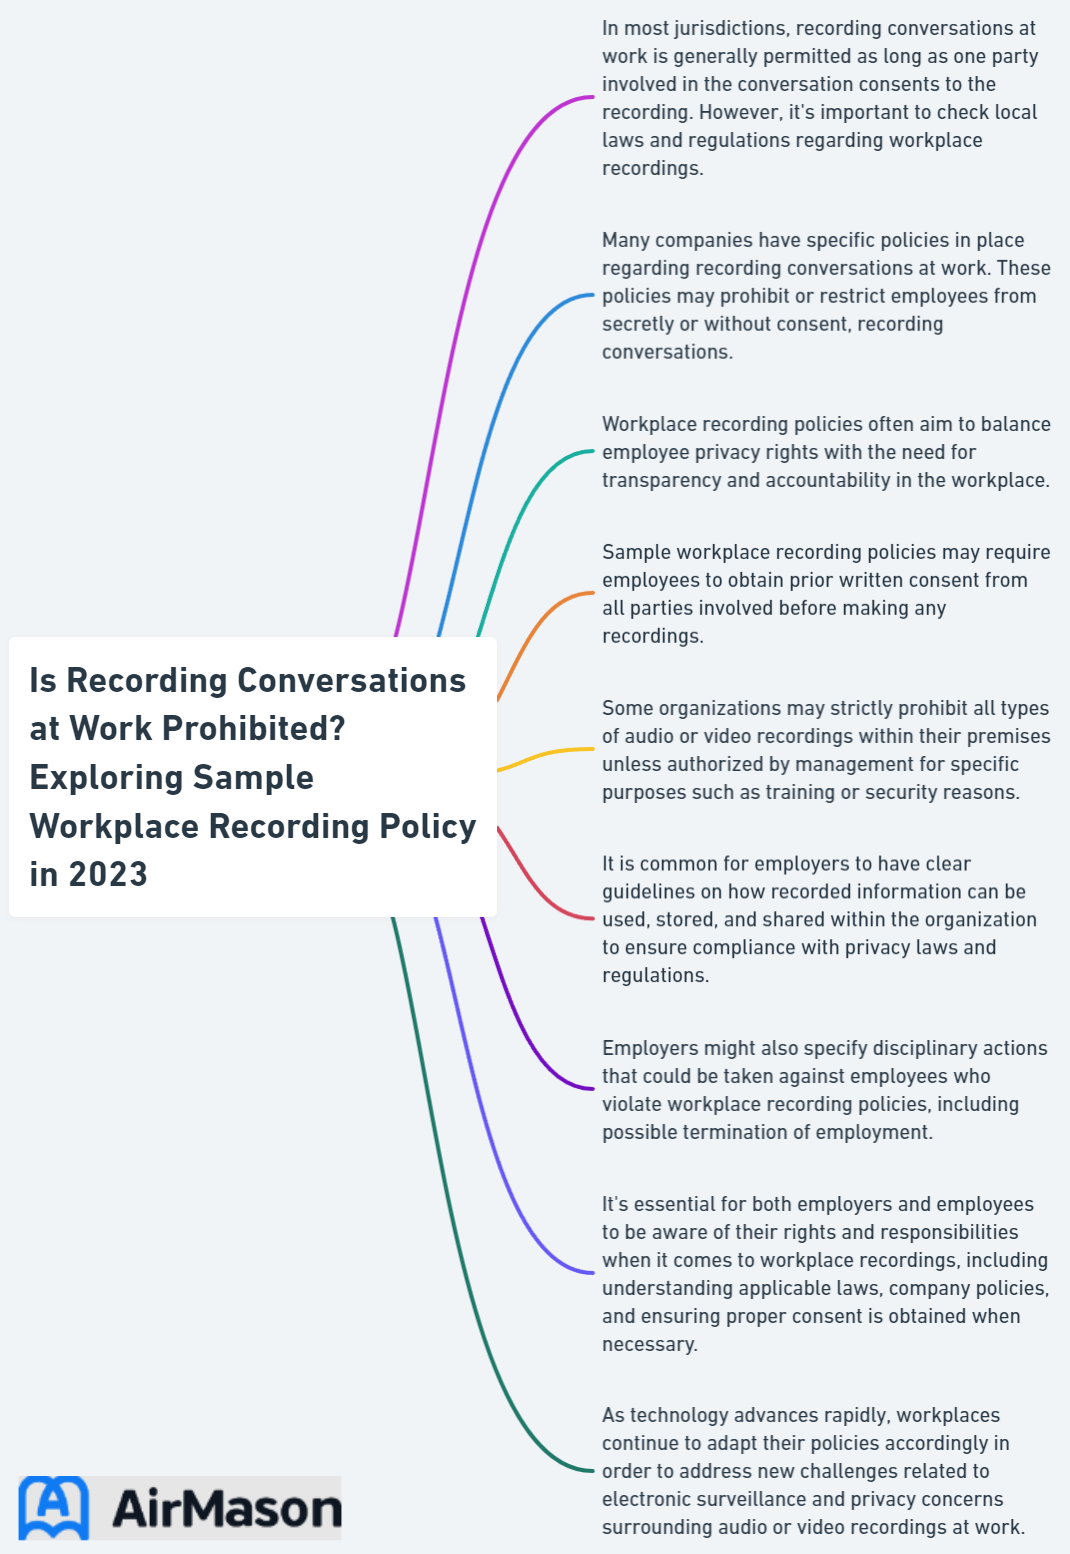 Is Recording Conversations at Work Prohibited? Exploring Sample Workplace Recording Policy in 2023